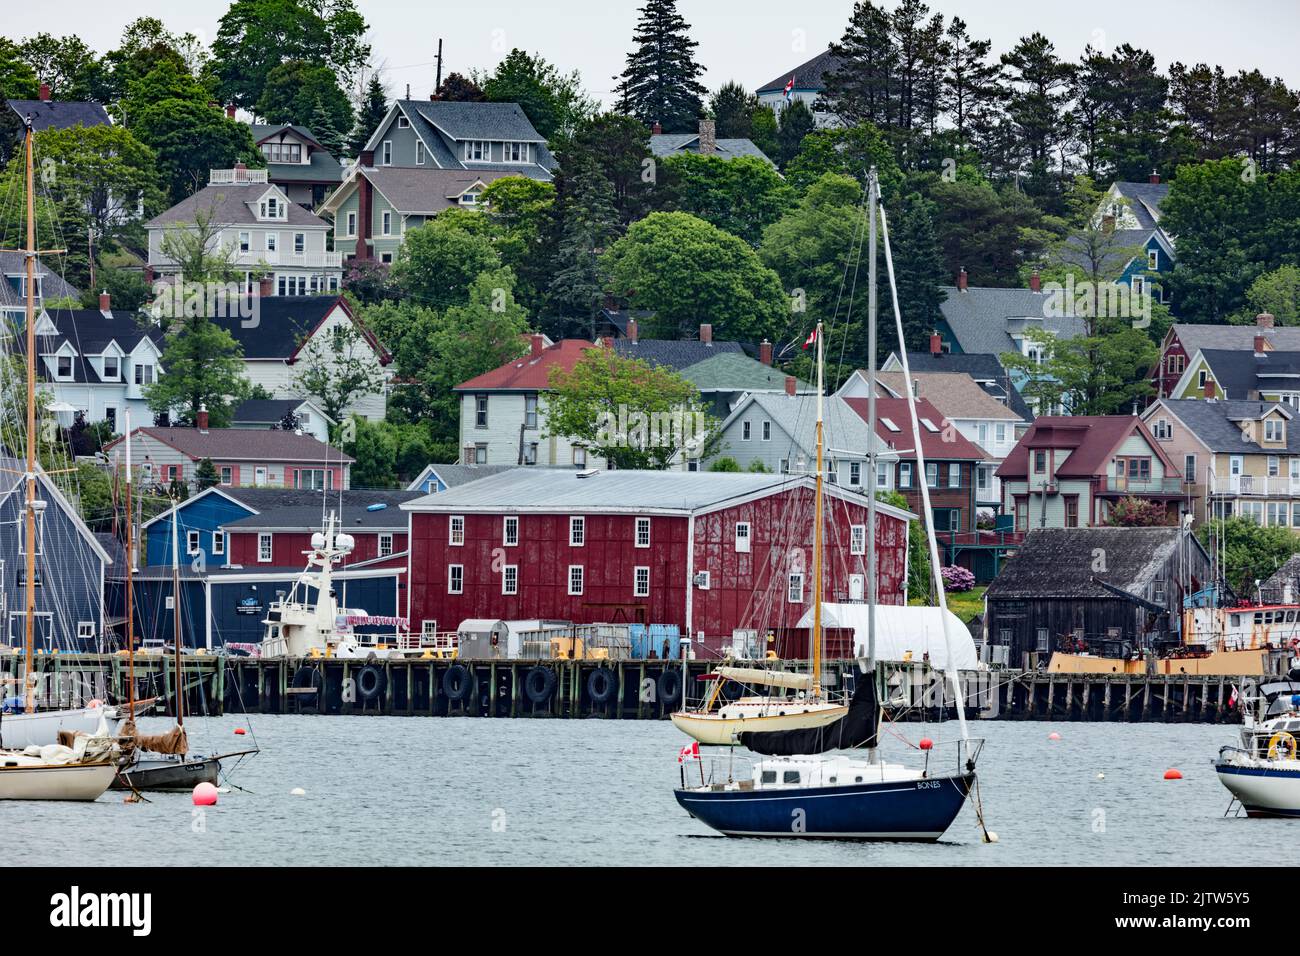 A UNESCO World Heritage Site, and voted the most beautiful town in Canada. Stock Photo